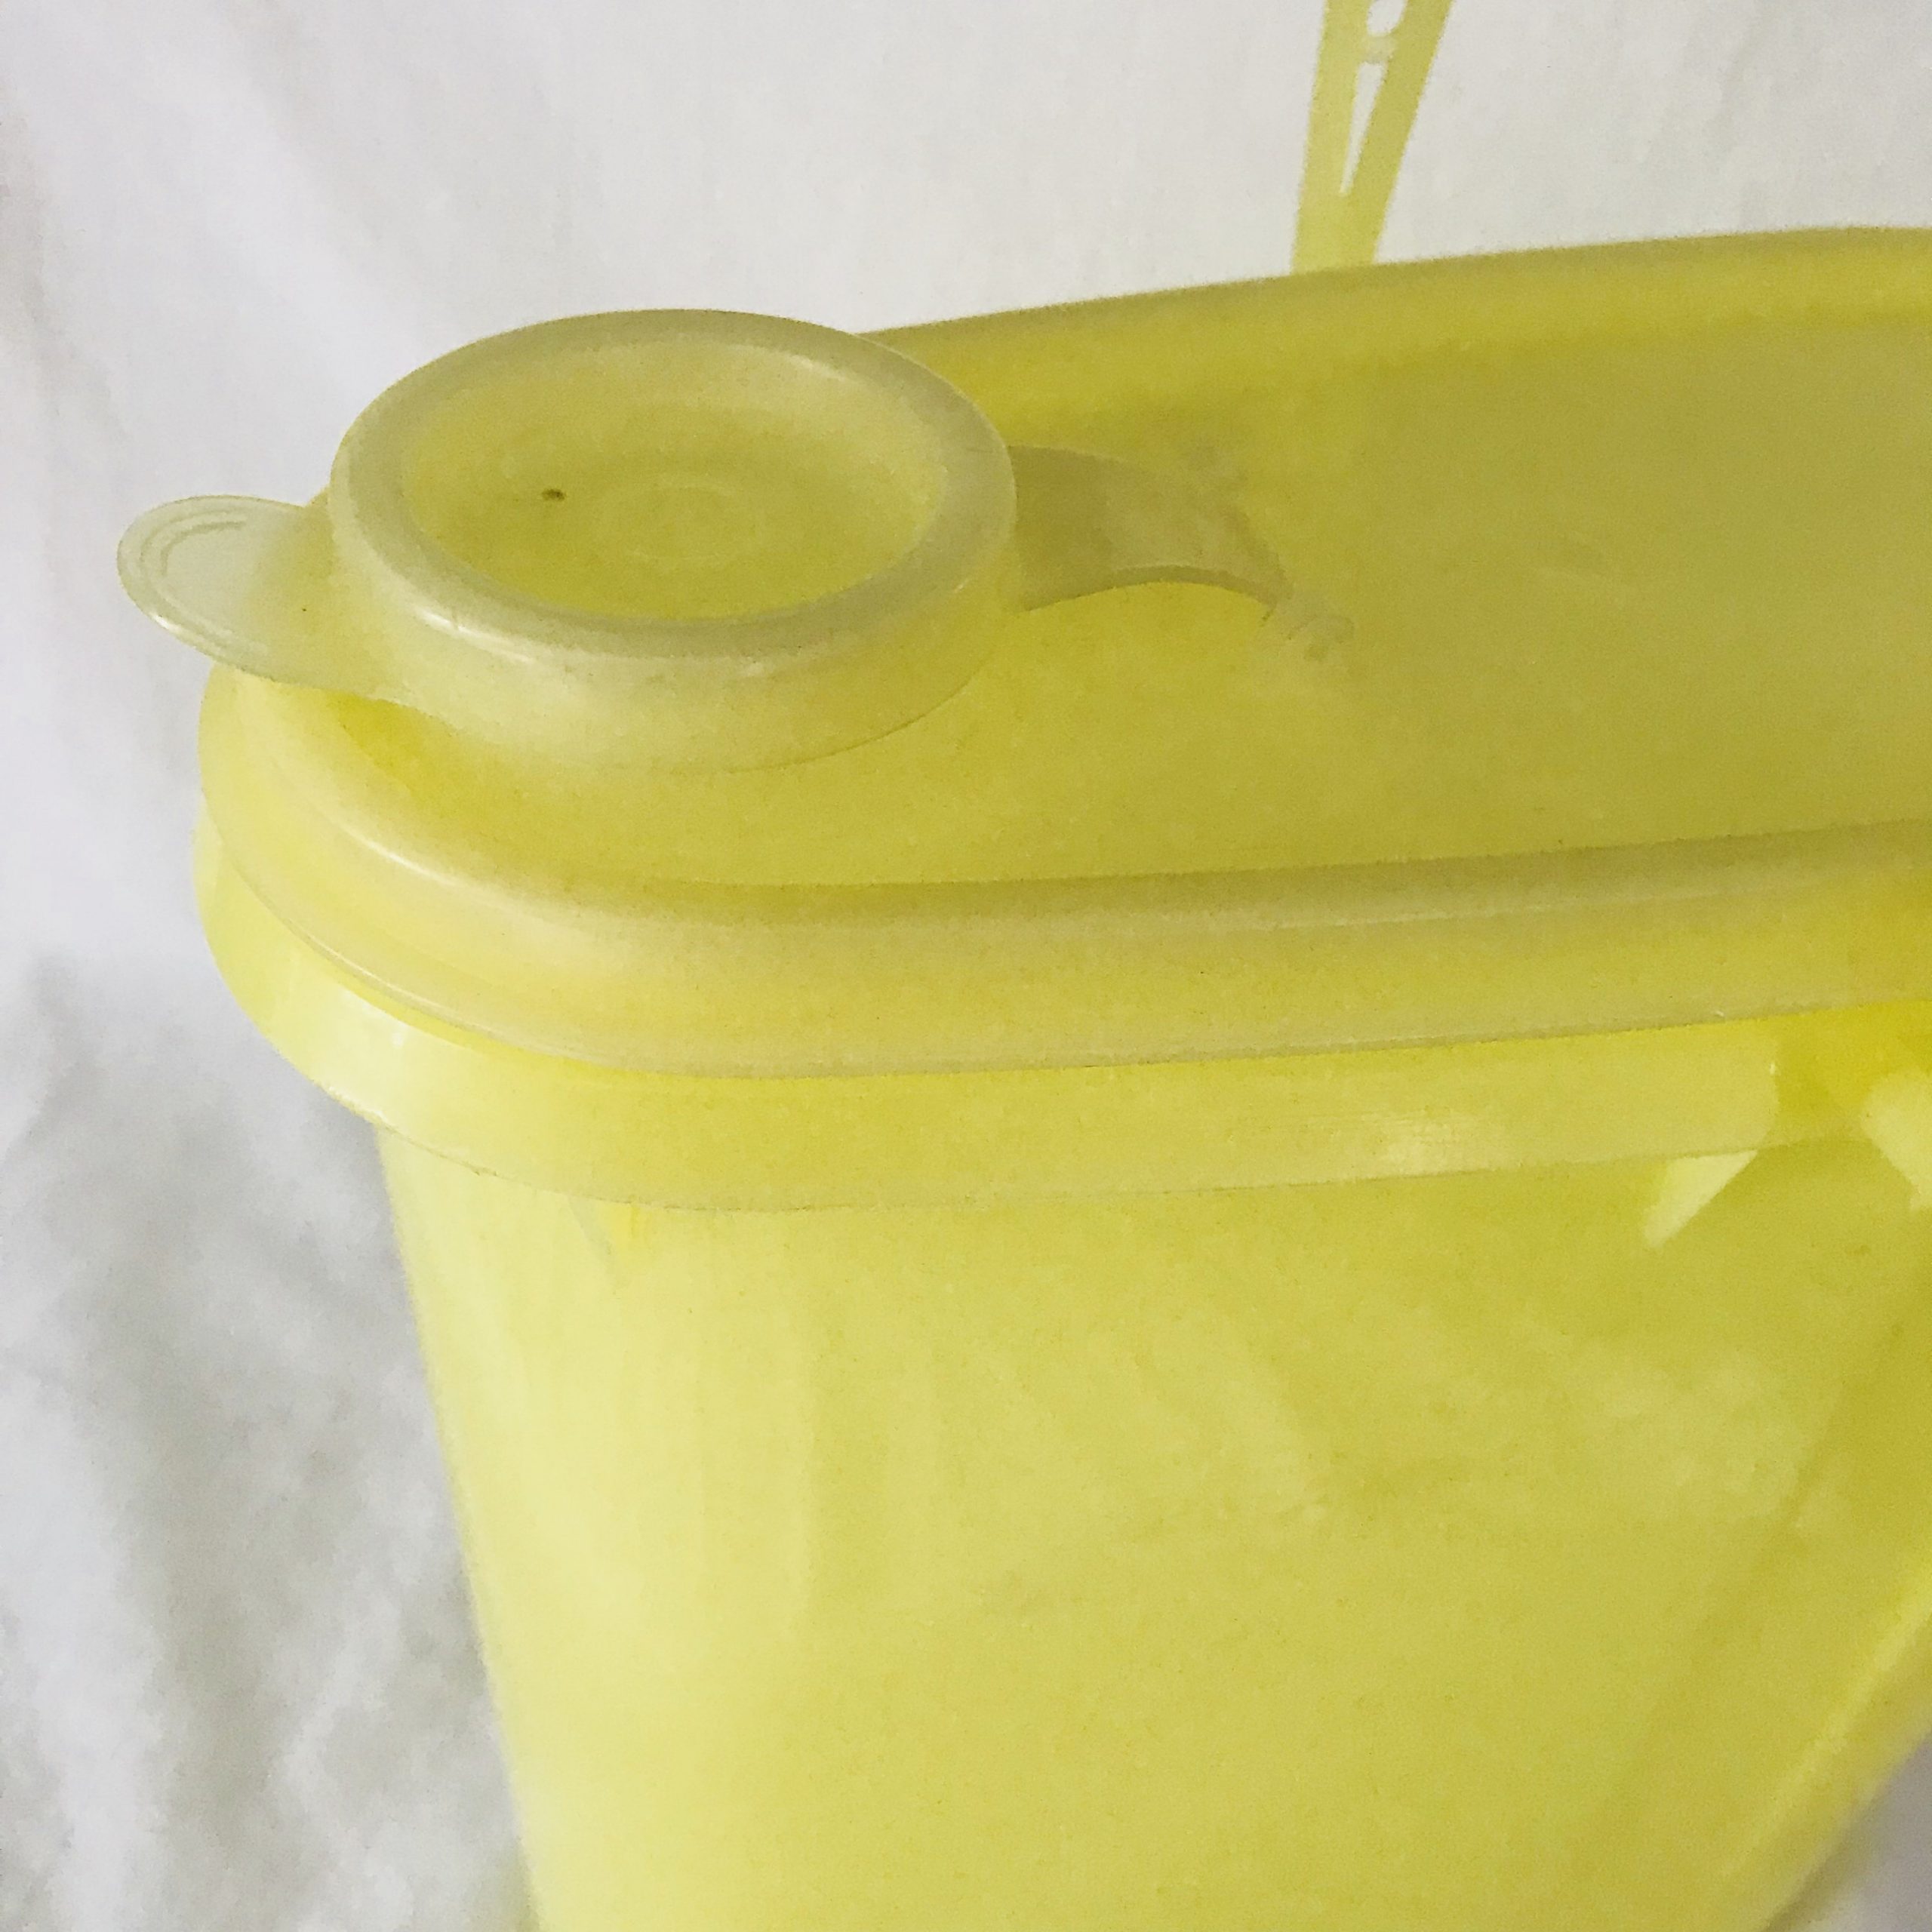 https://www.truevintageantiques.com/wp-content/uploads/2019/12/vintage-tupperware-refrigerator-container-pitcher-koolaid-iced-tea-water-2-quart-buddy-pitcher-with-flip-top-picnic-summer-outdoor-patio-5e02d1a23-scaled.jpg